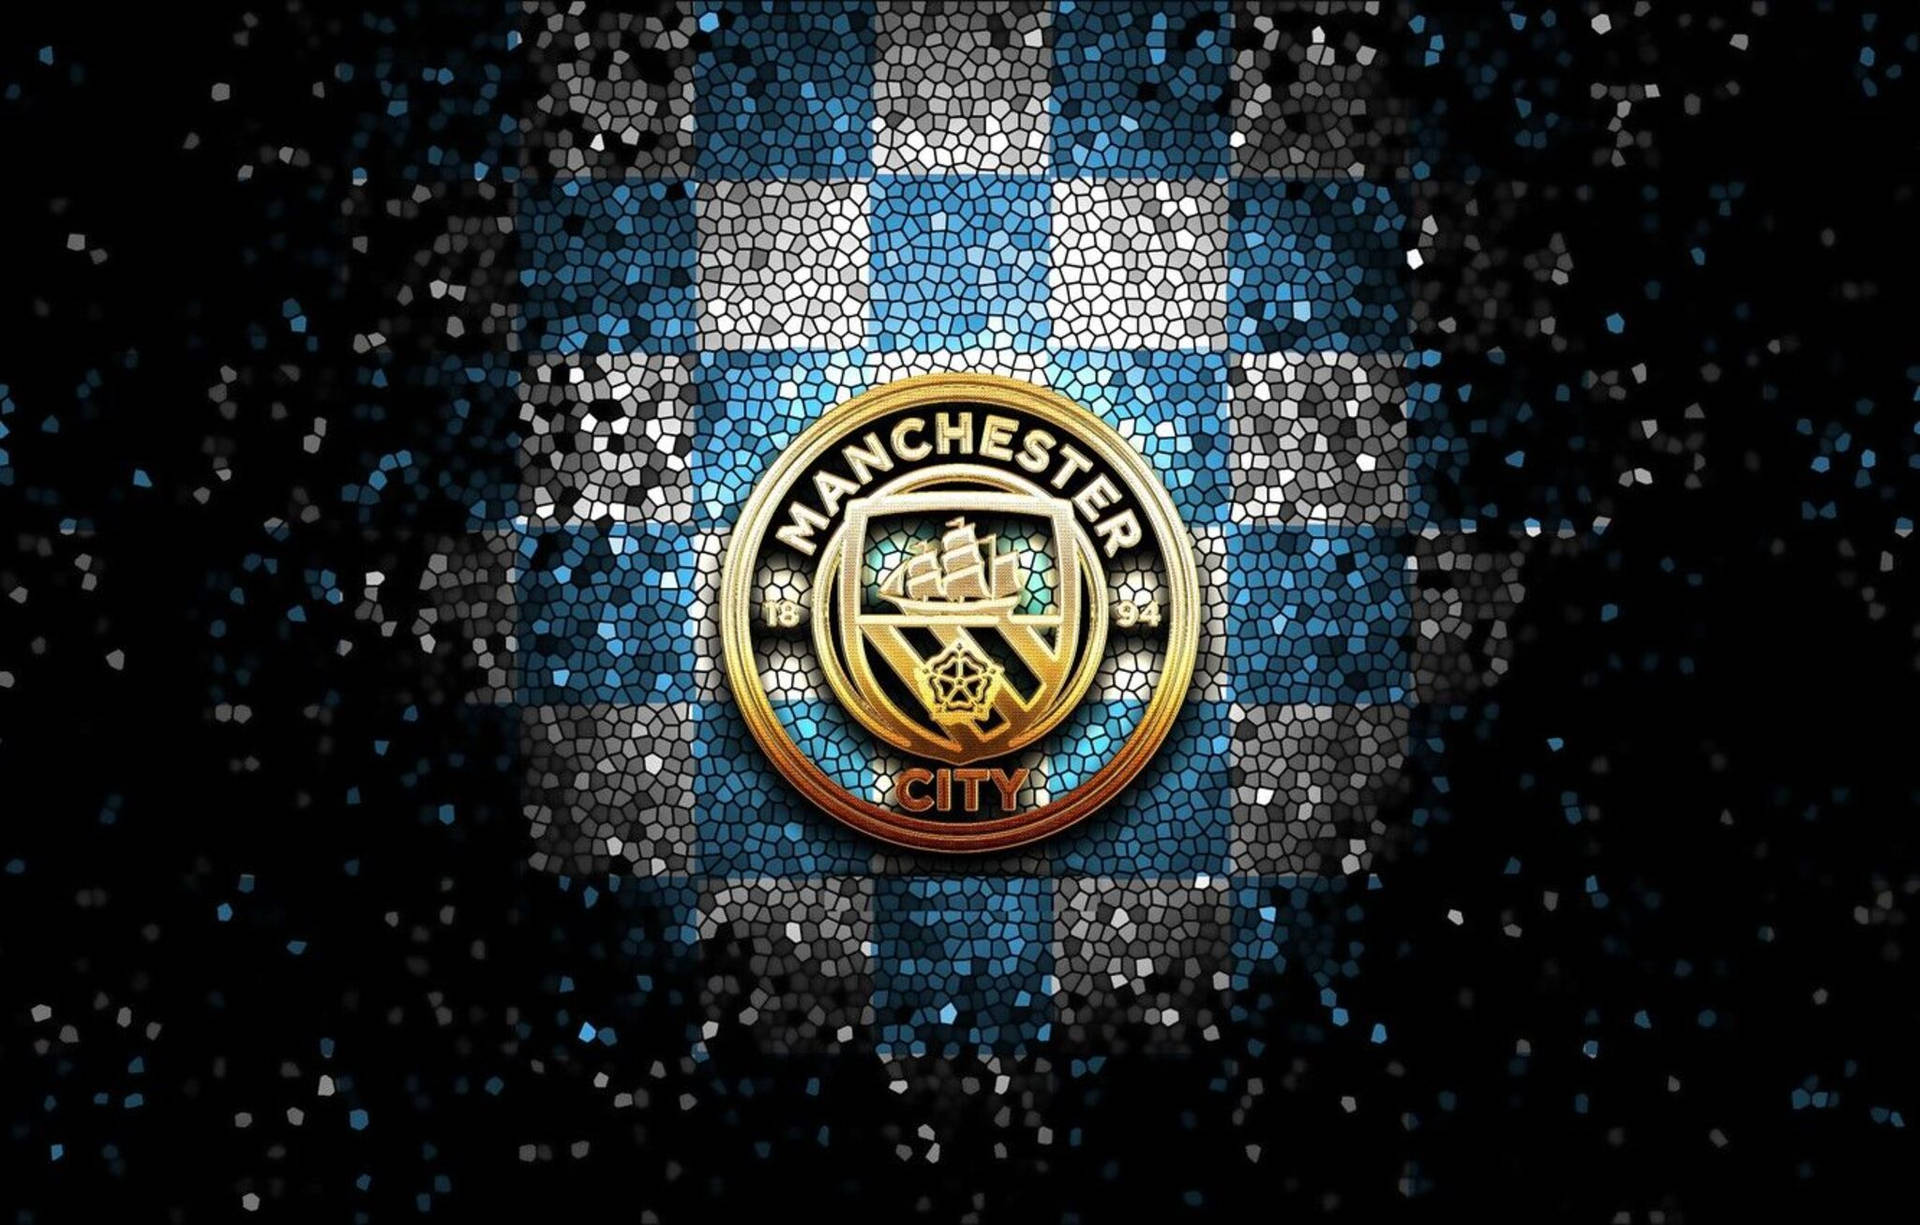 The Manchester City Logo Shines! Background